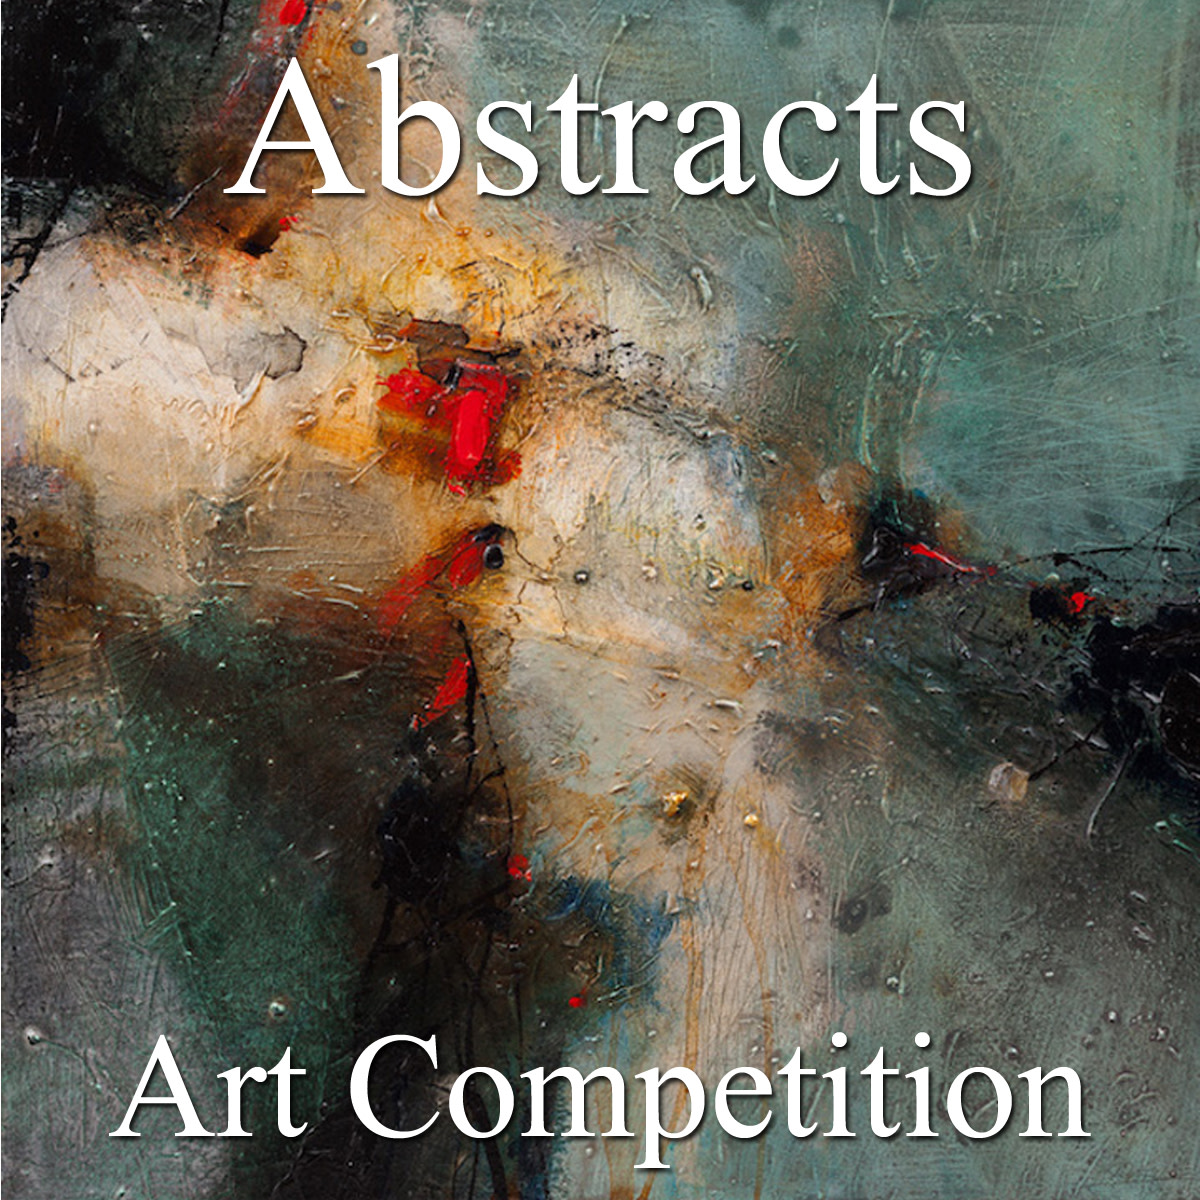 Call for Entry 10th Annual "Abstracts" Online Art Competition